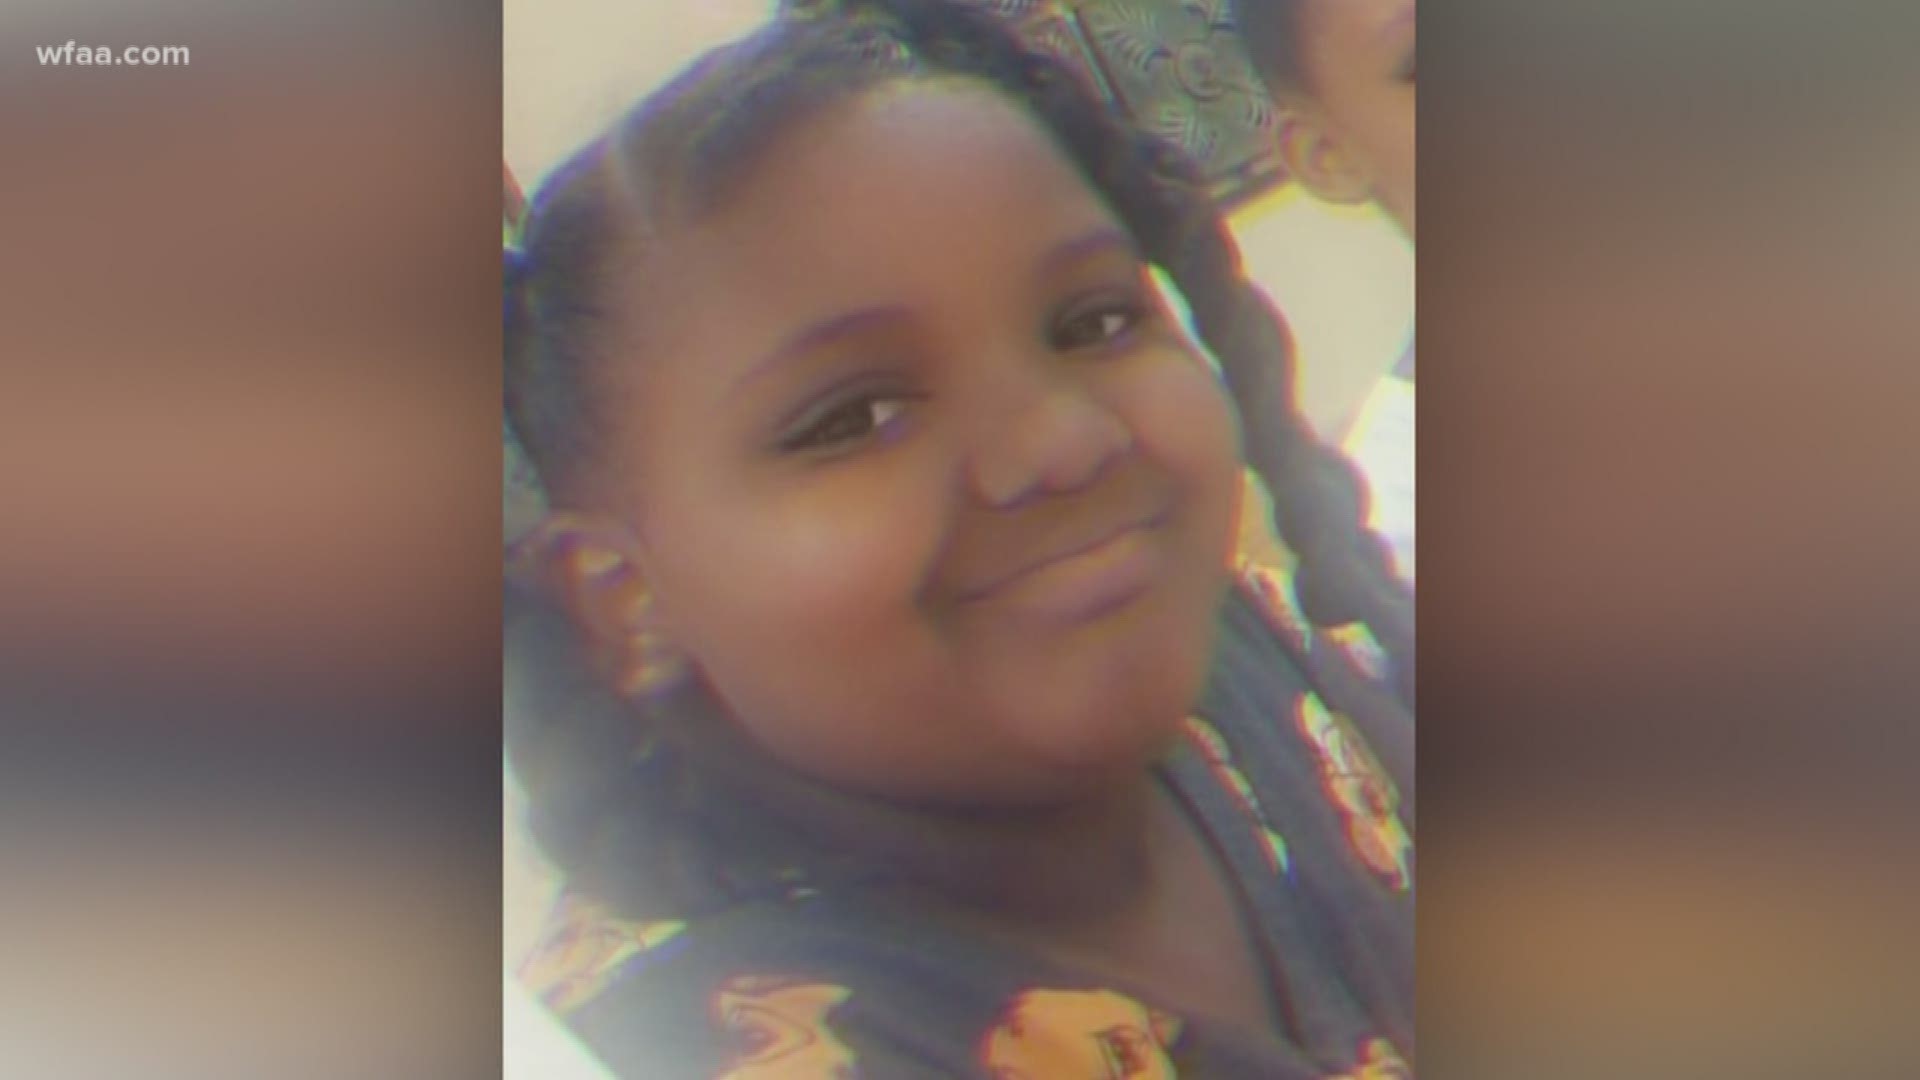 Rubye Rhodes, 9, was shot during a road rage incident Sunday night on Interstate 35E. The suspect has not been arrested.